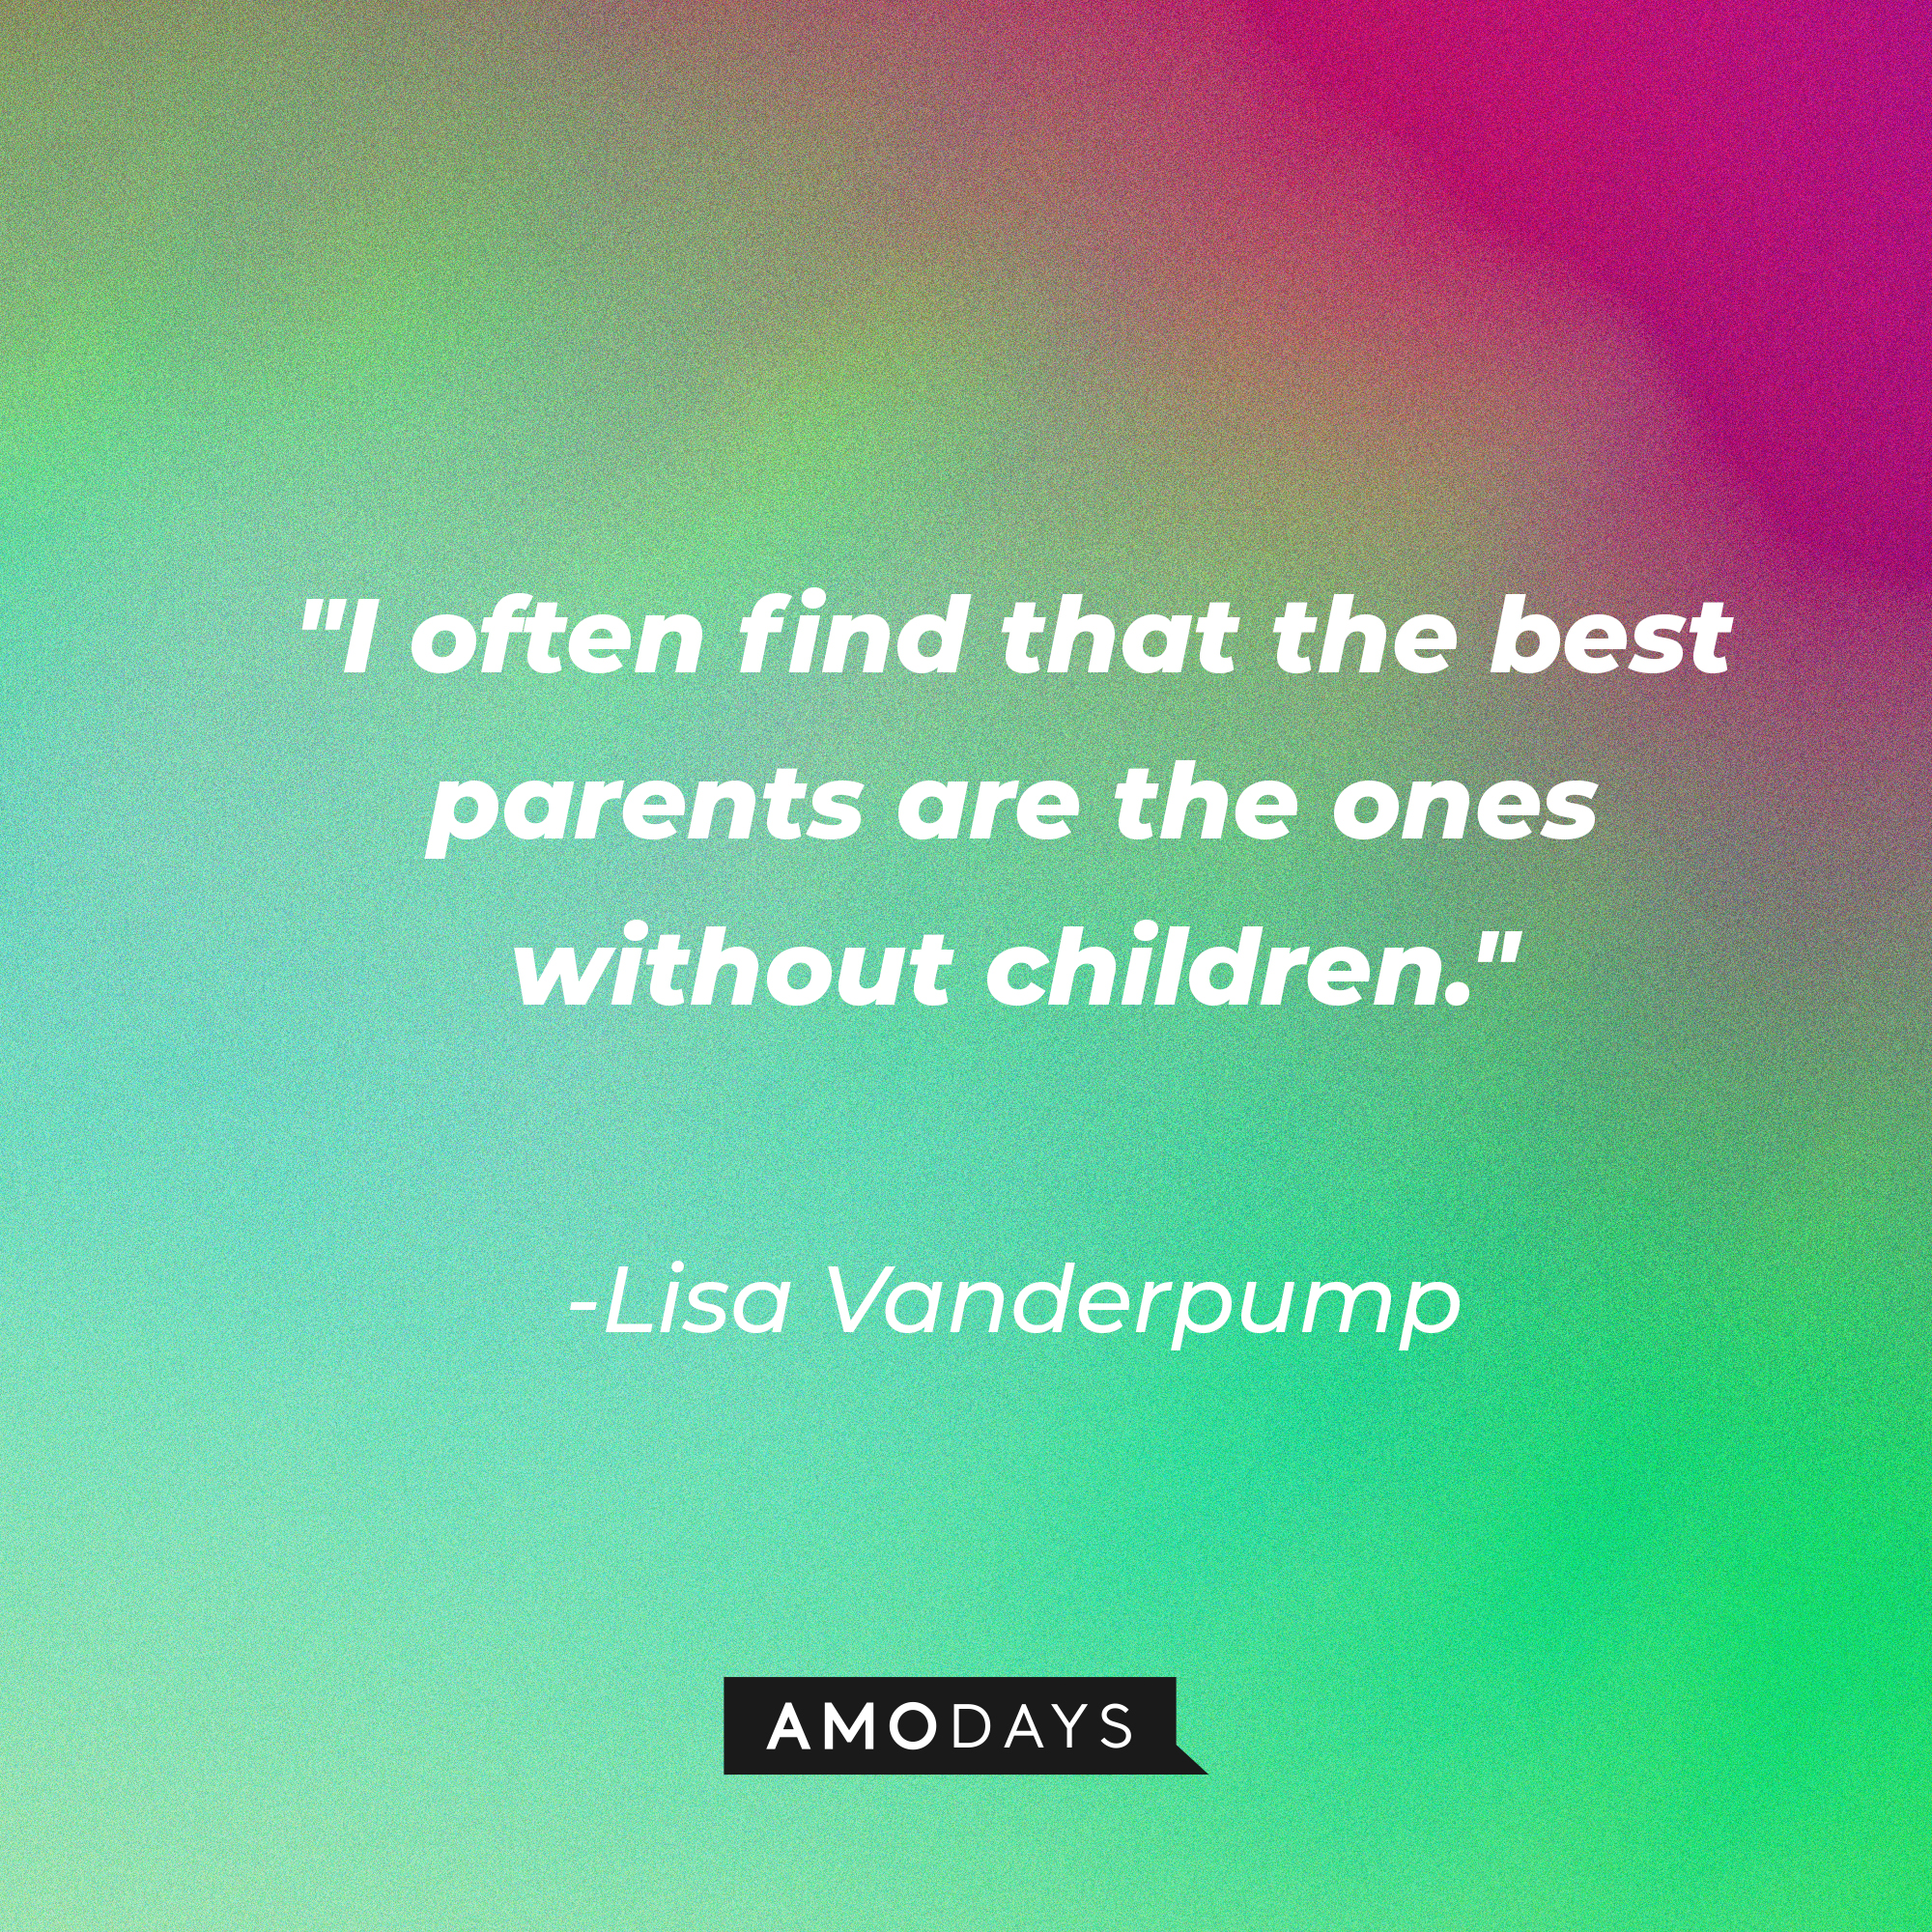 Lisa Vanderpump’s quote:  “I often find that the best parents are the ones without children.”  | Source: AmoDays